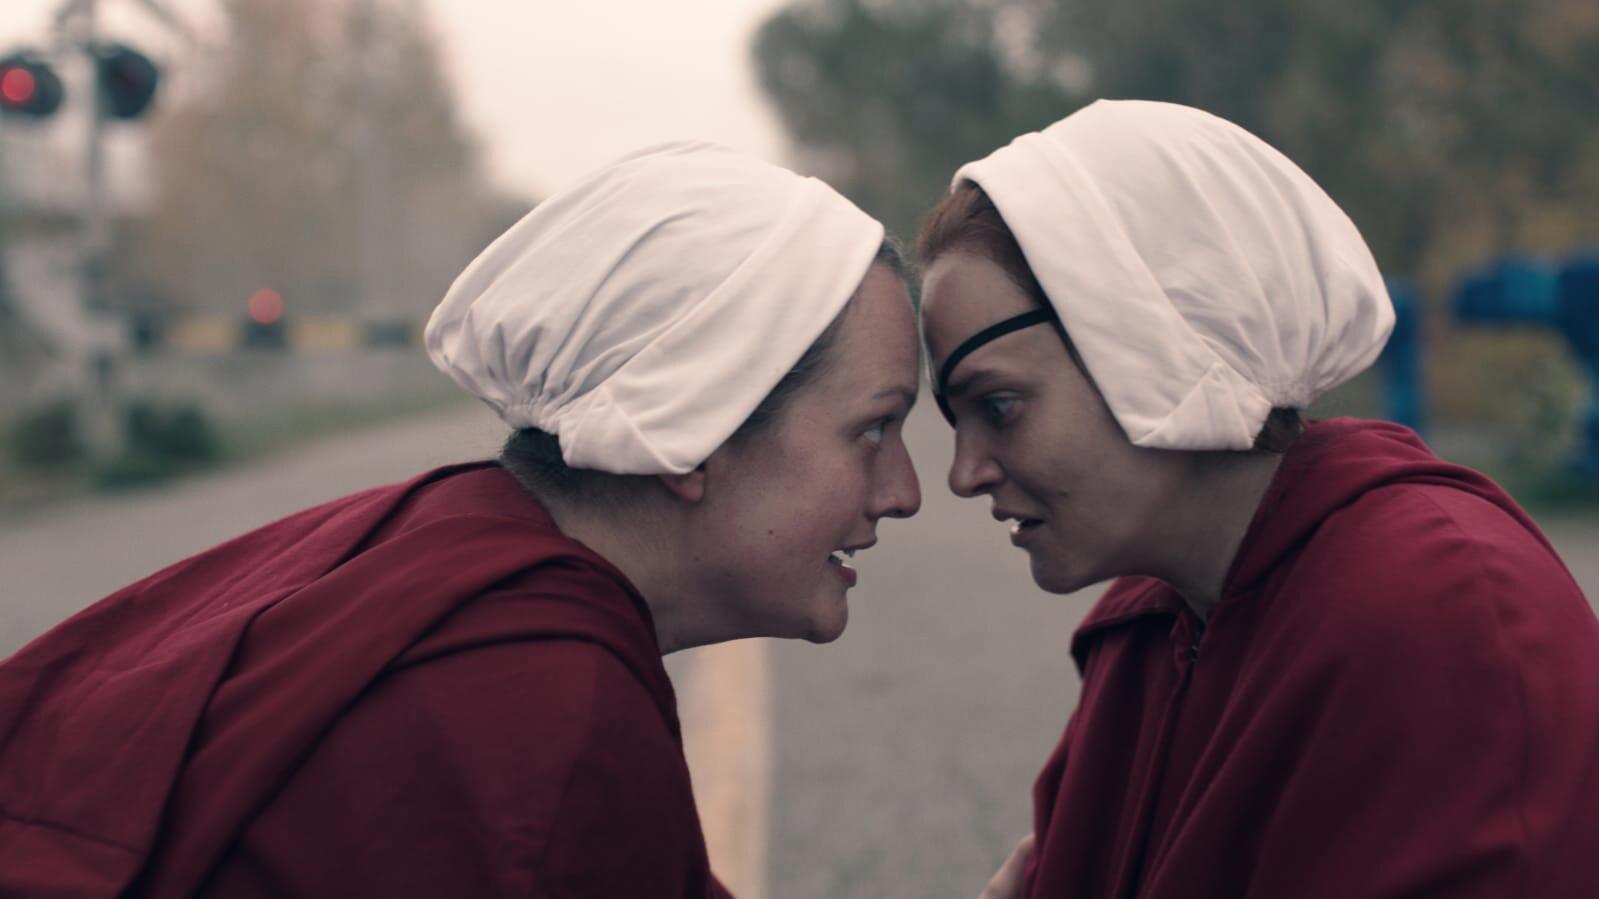 Elisabeth Moss as June and Madeline Brewer as Janine in season 4 of 'The Handmaid's Tale'